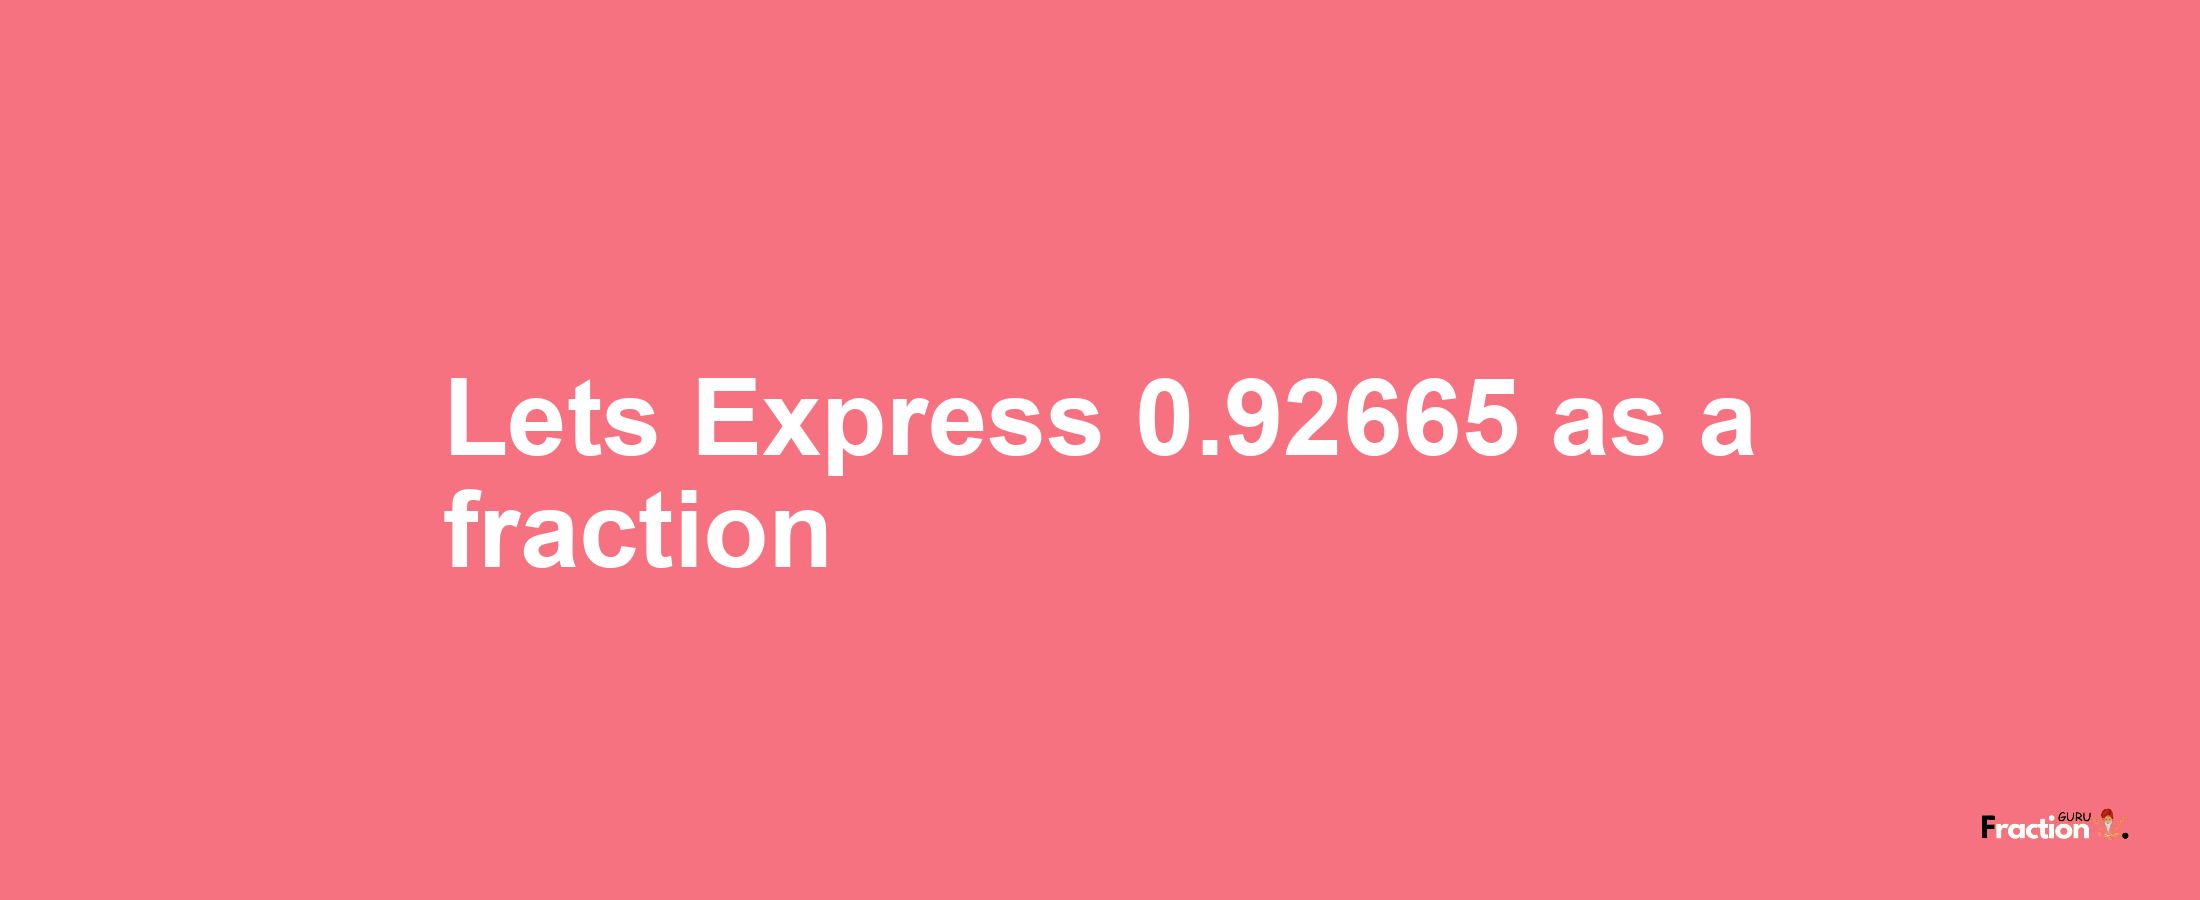 Lets Express 0.92665 as afraction